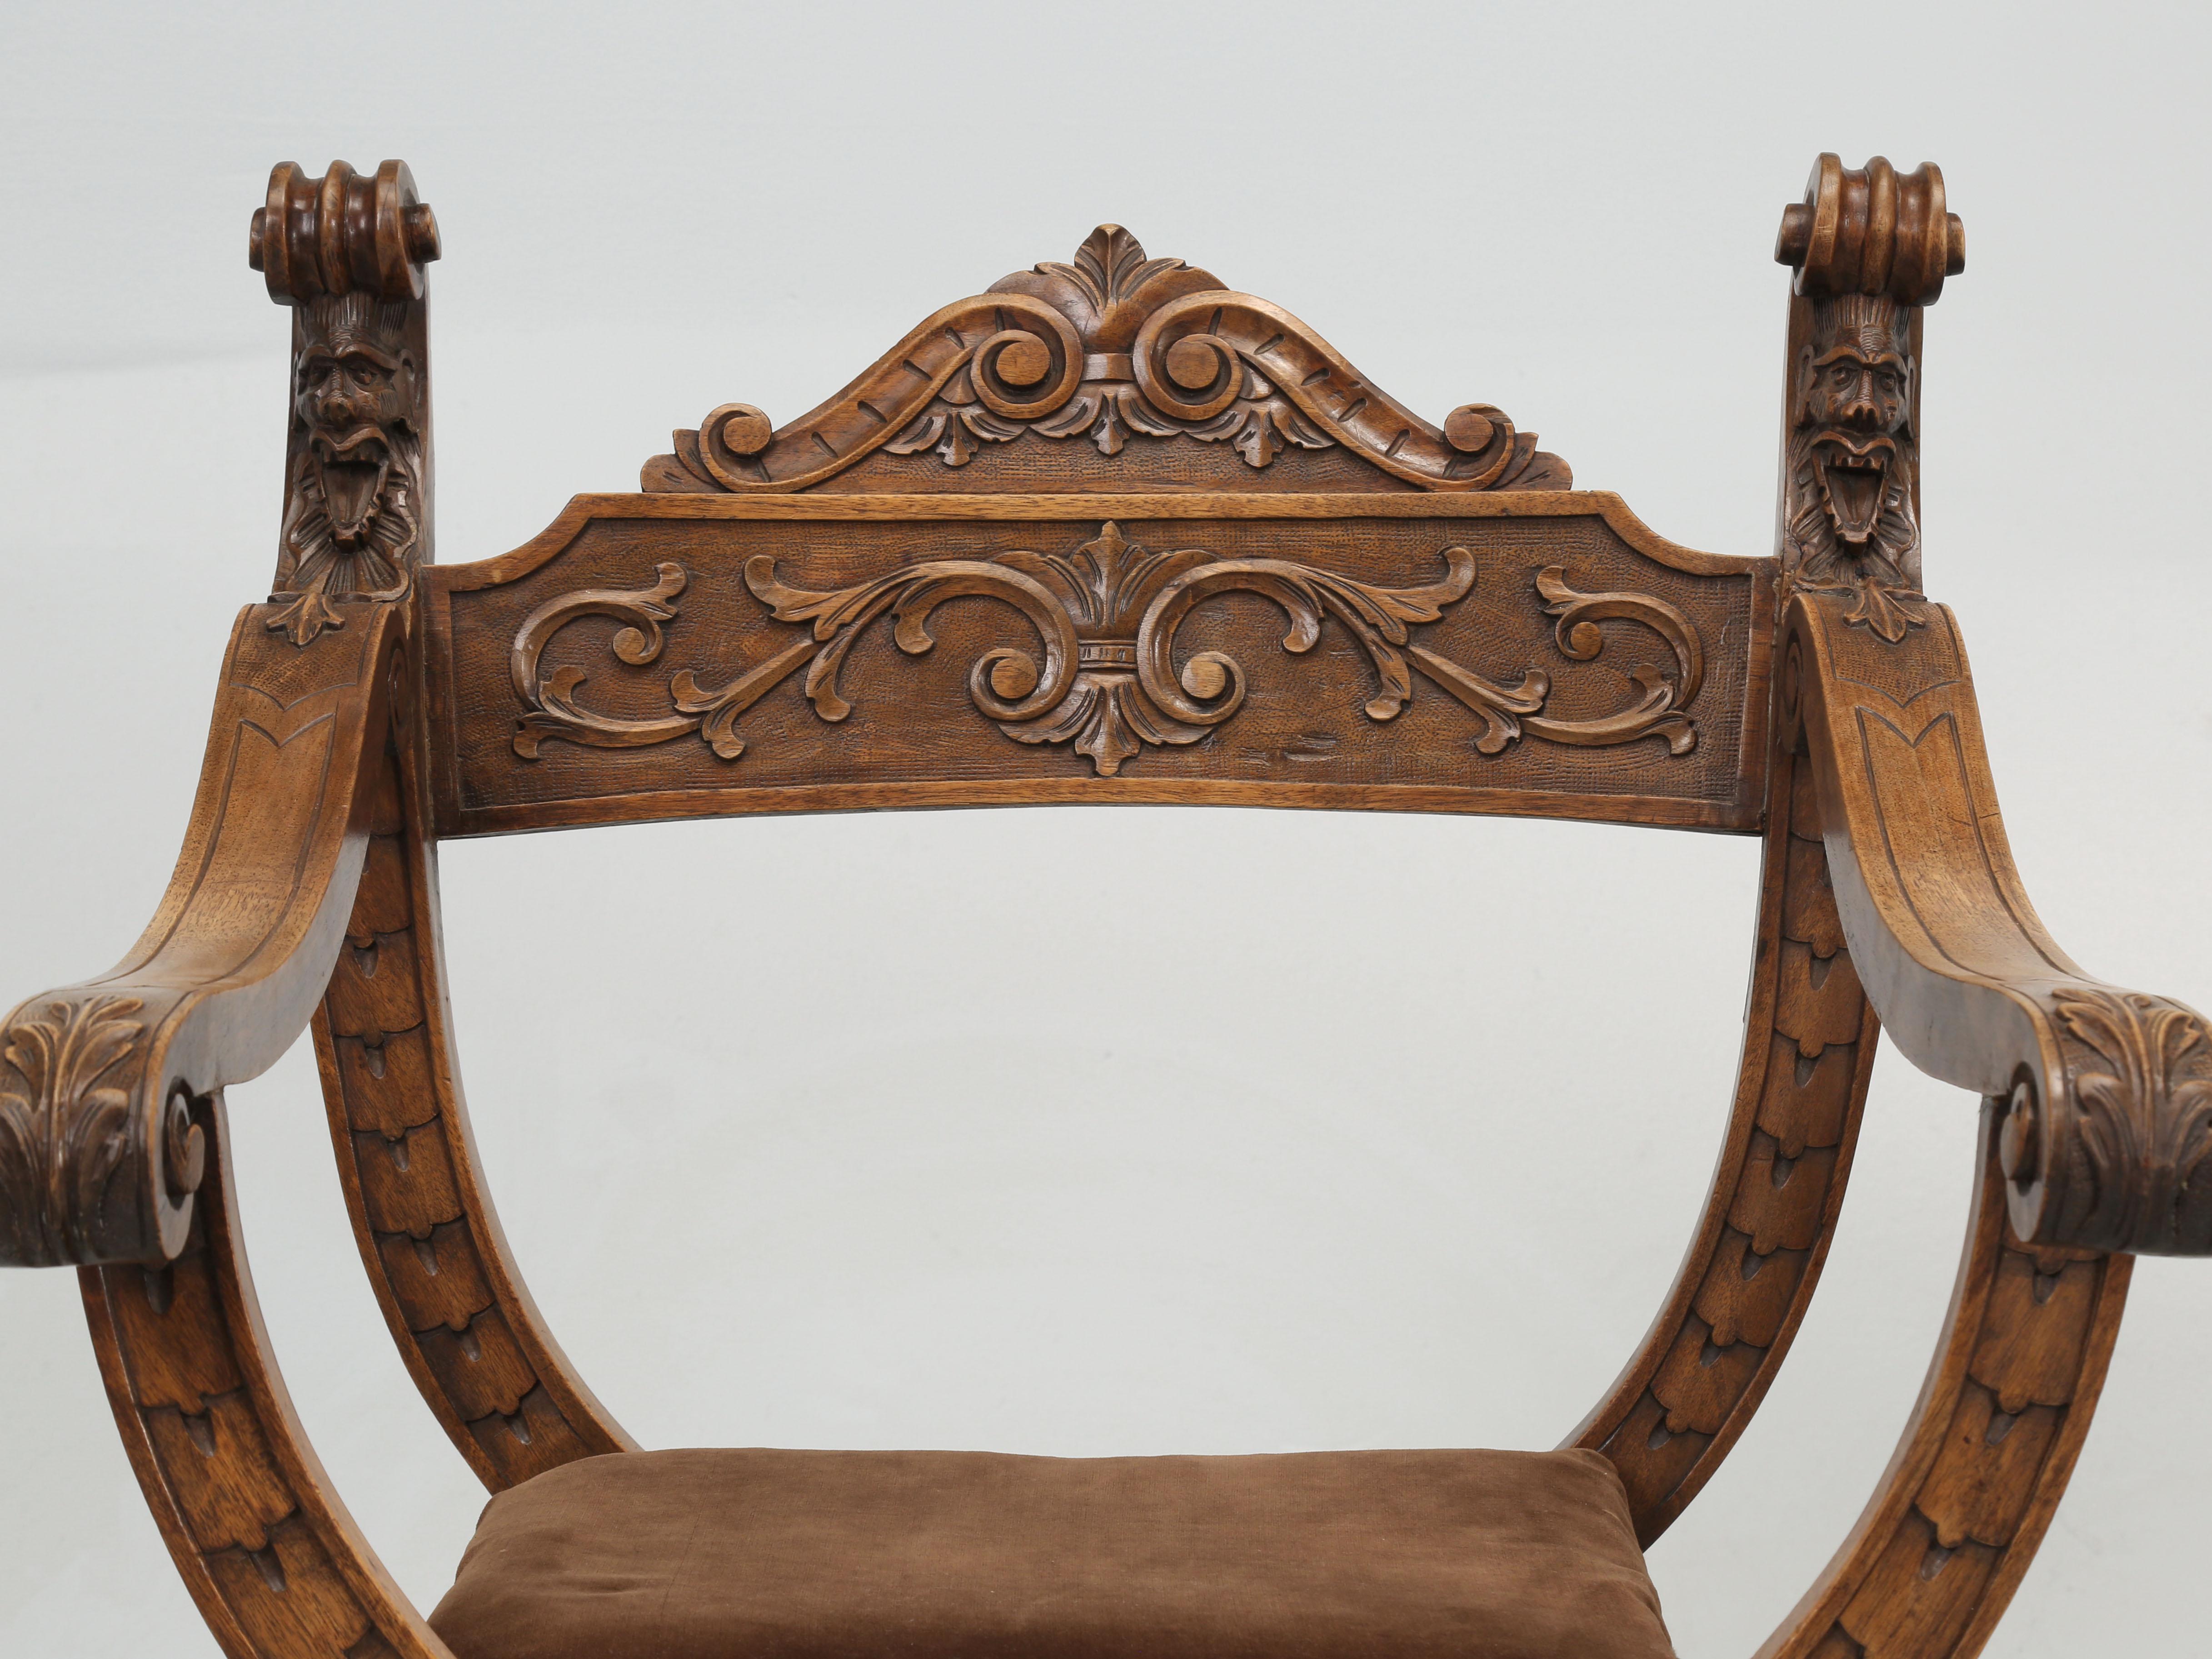 Antique French walnut armchairs, commonly referred to in the style of Dagobert. The infamous Dagobert chair is a traditional French armchair that originated with the legendary bronze throne chair of King Dagobert I, who reigned during the 7th